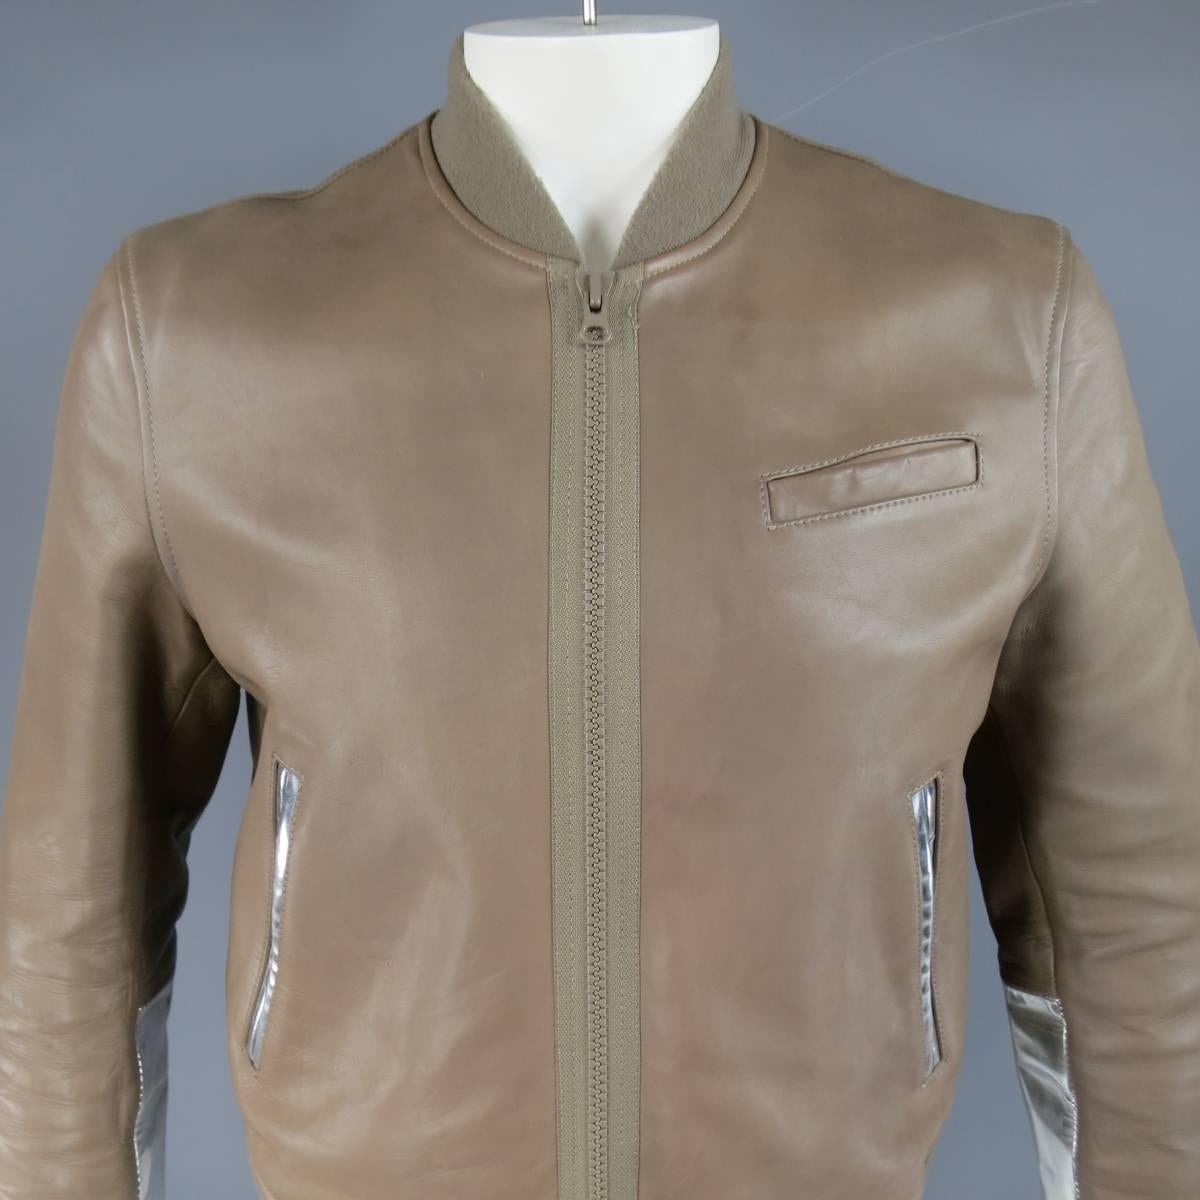 Ultra chic ACNE bomber jacket in a structured taupe leather featuring a thick beige zip closure, stretch band hems, glossy metallic silver leather panels, and elbow pads. Pilling on elastic bands and wear throughout leather. As-Is.
 
Good